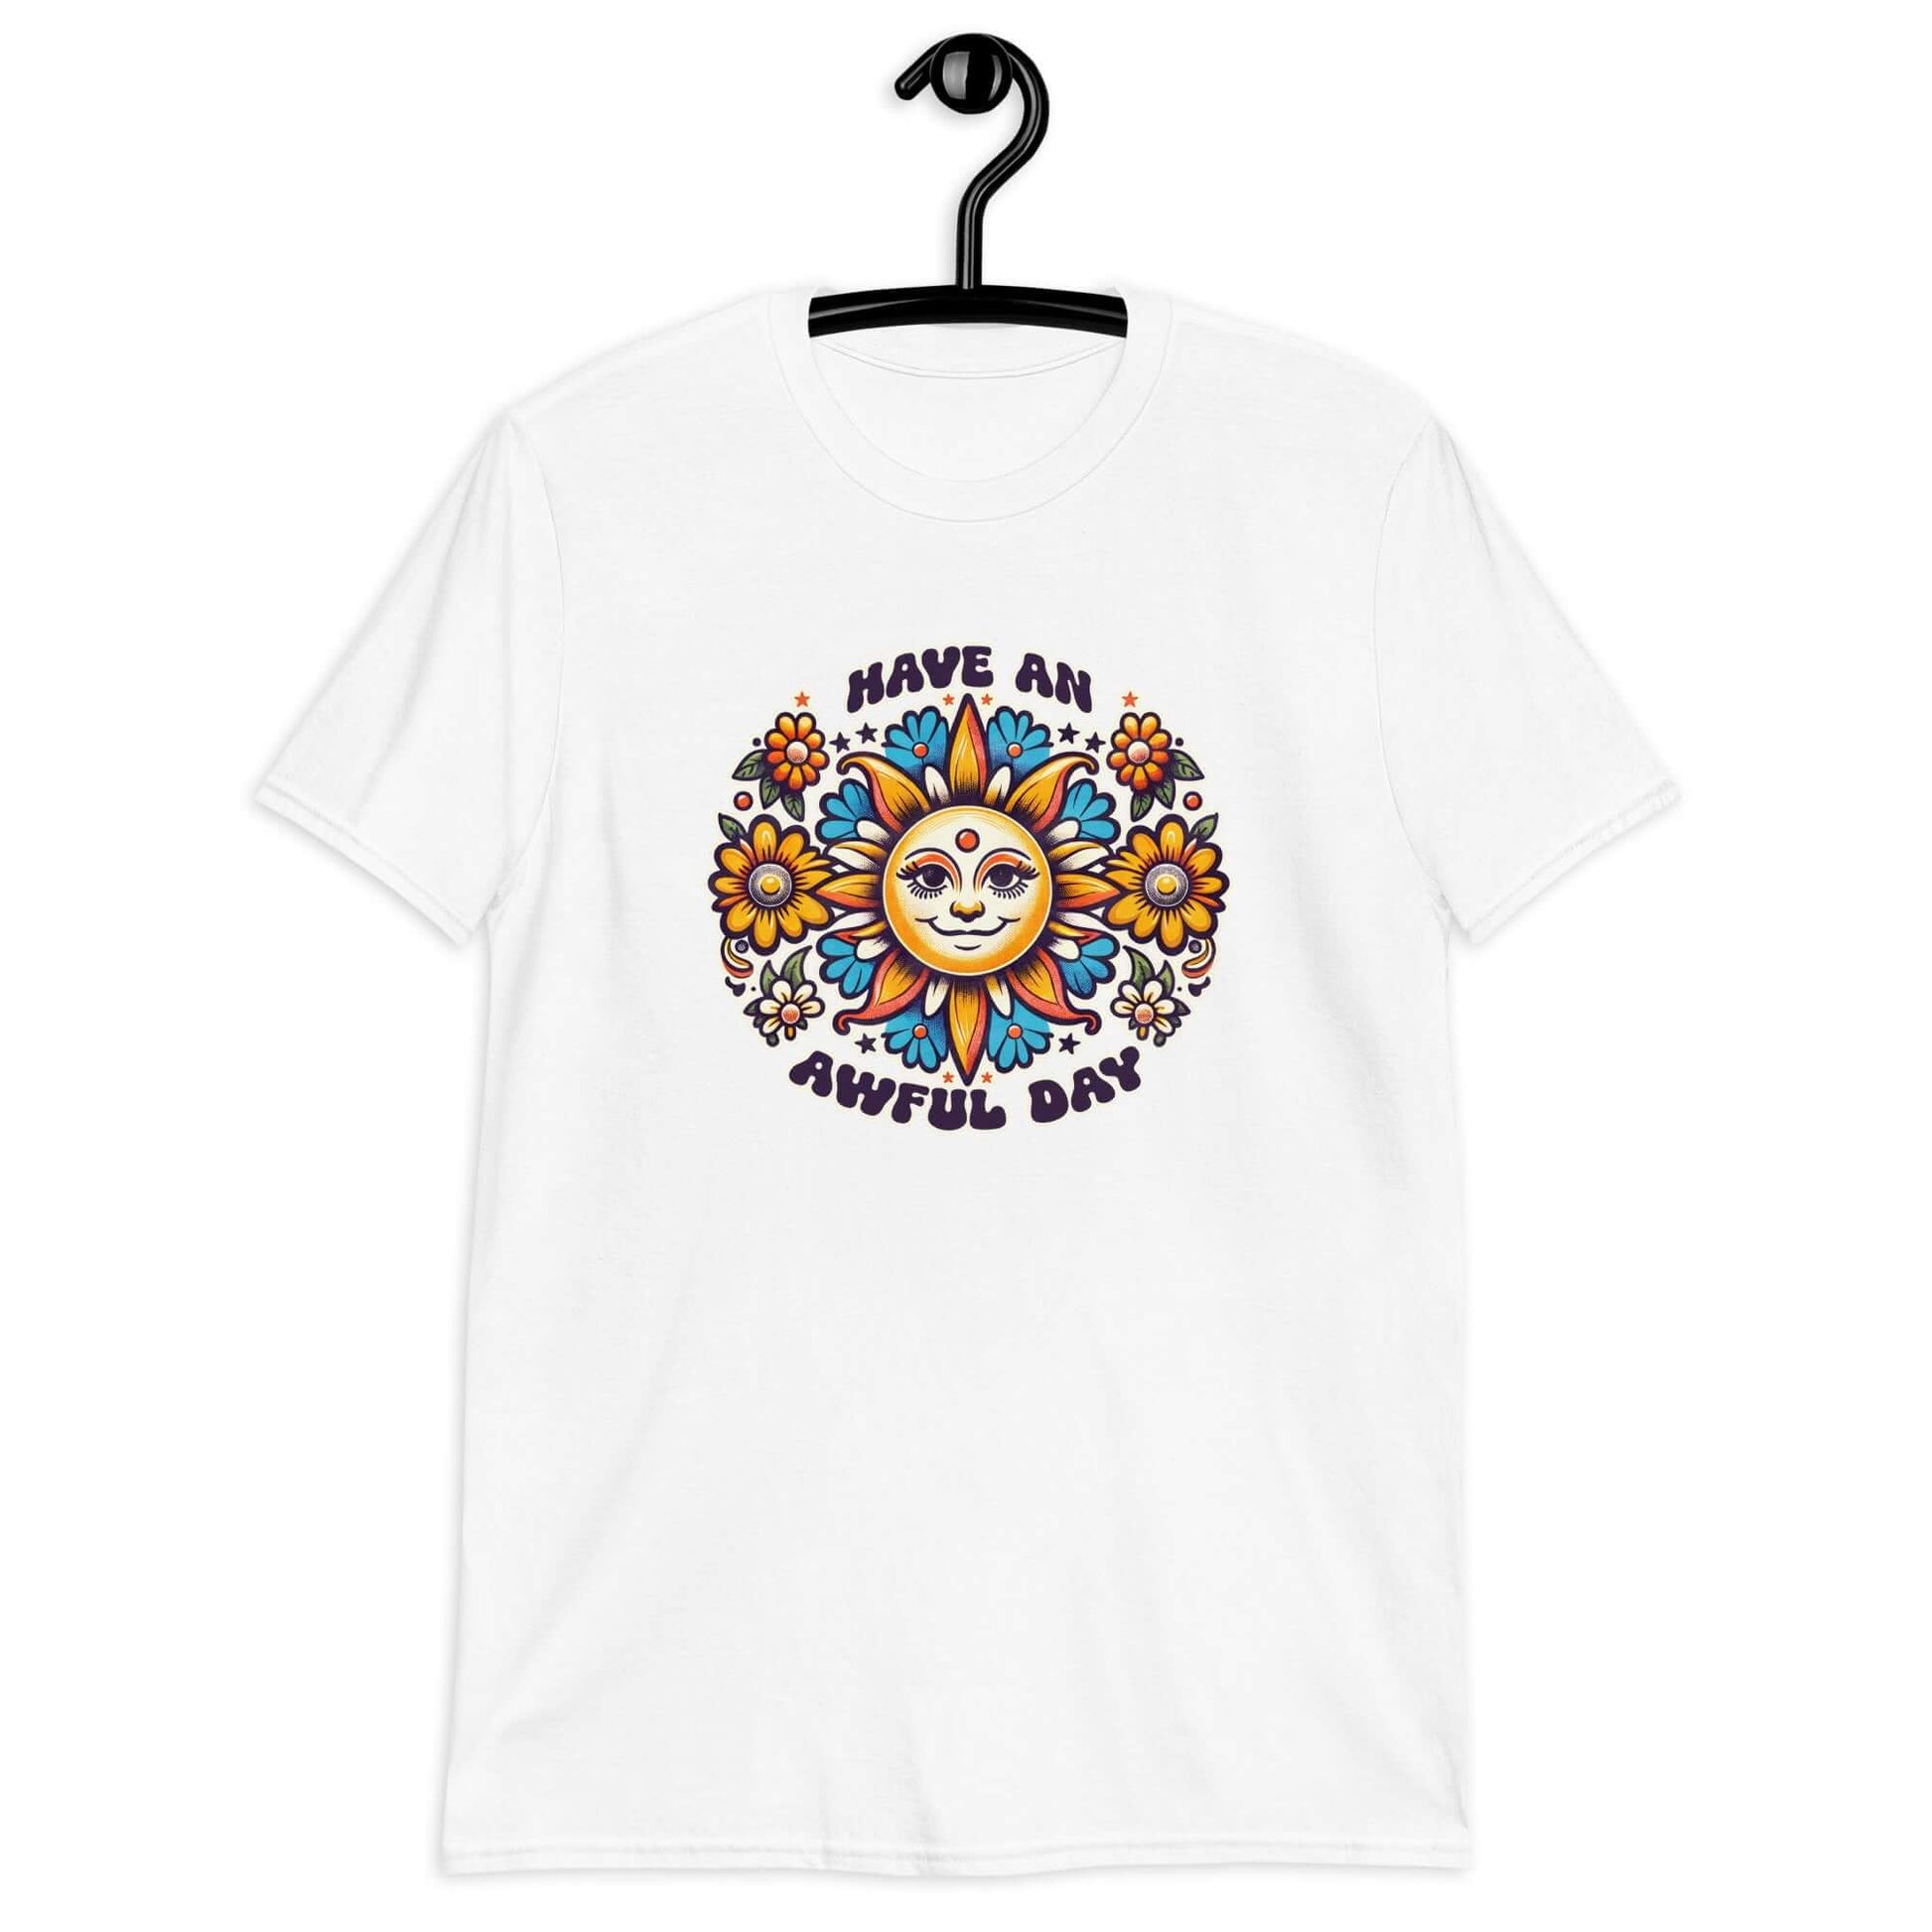 White t-shirt with a sun graphic and the phrase Have an awful day printed on the front.